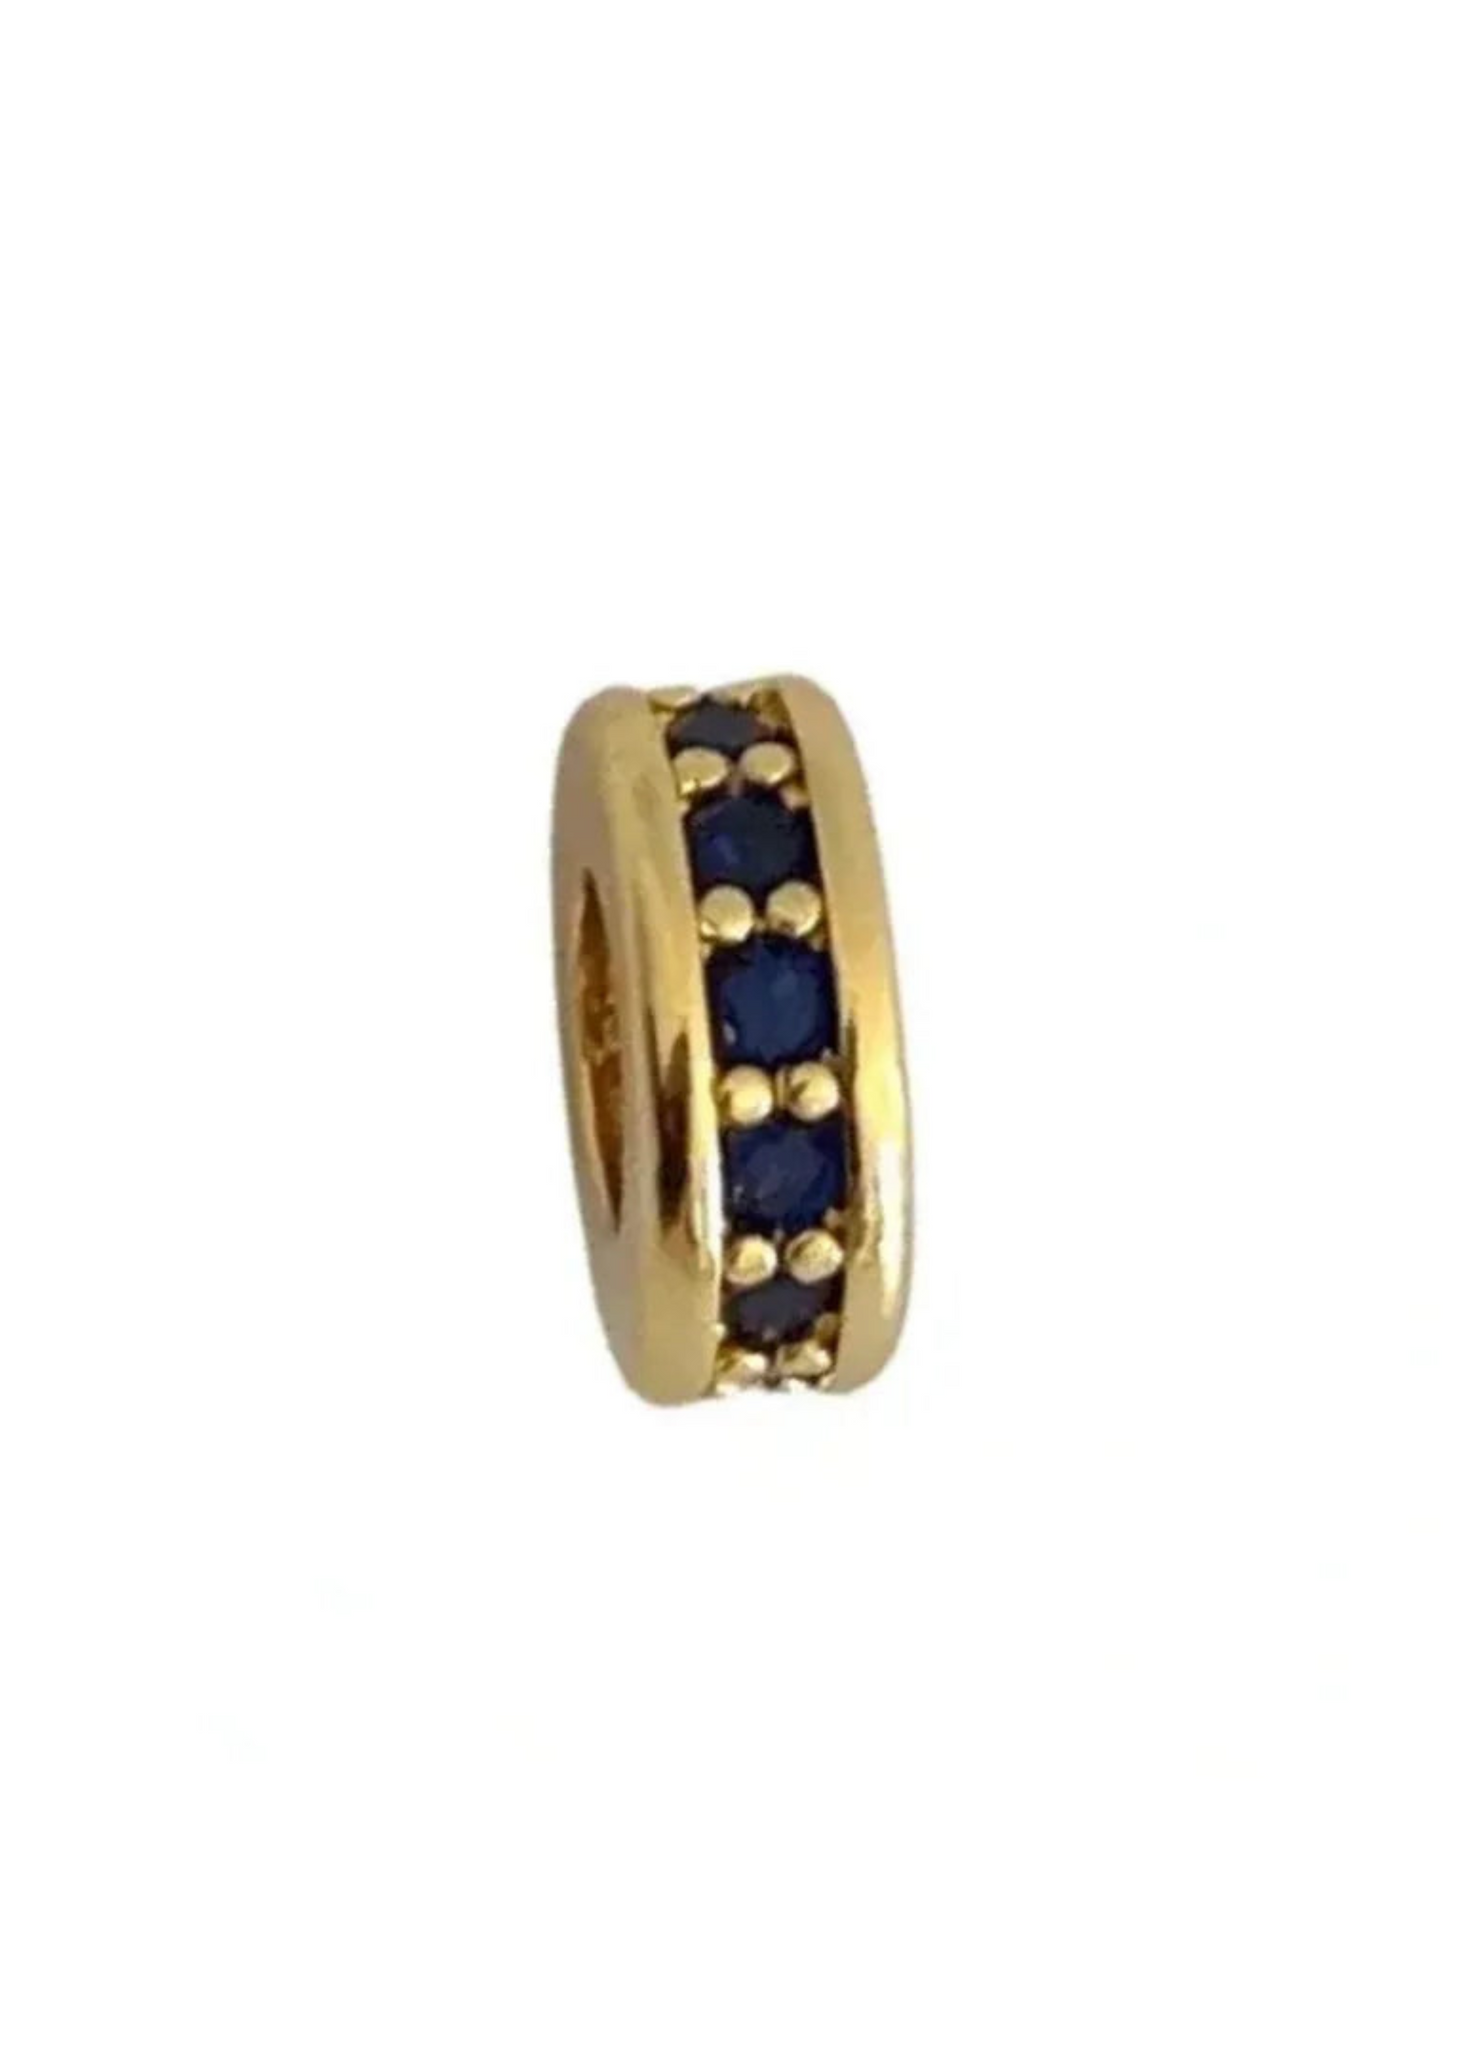 Spacer Bead - Gold/Sapphire